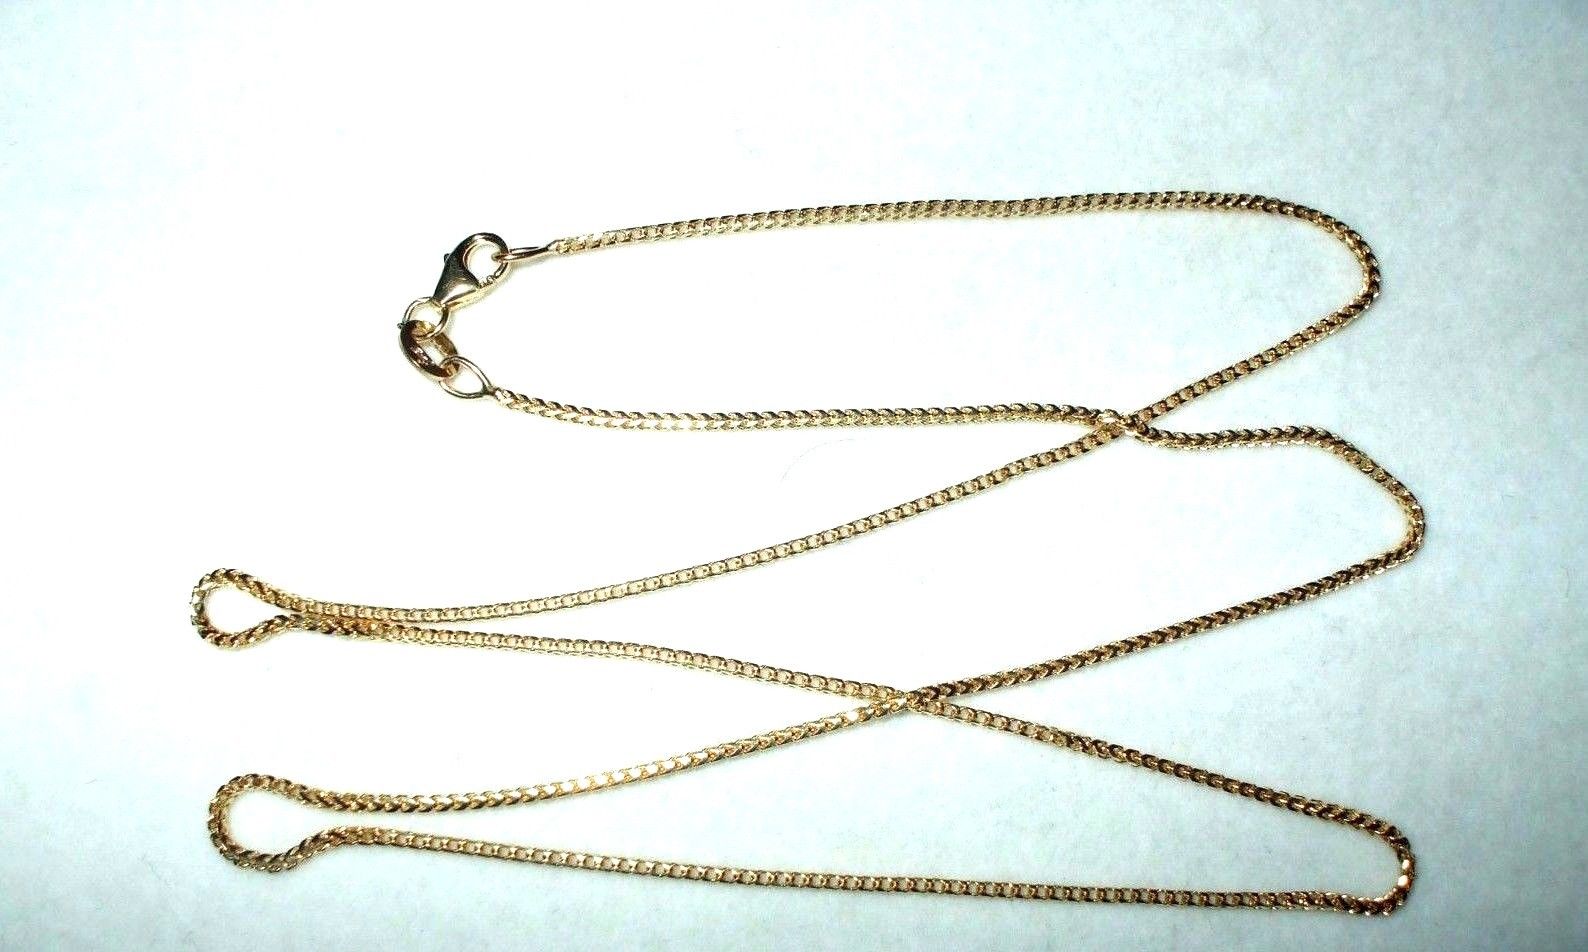 20 inch 14K yellow gold Franco chain with lobster clasp 3.4 grams $480